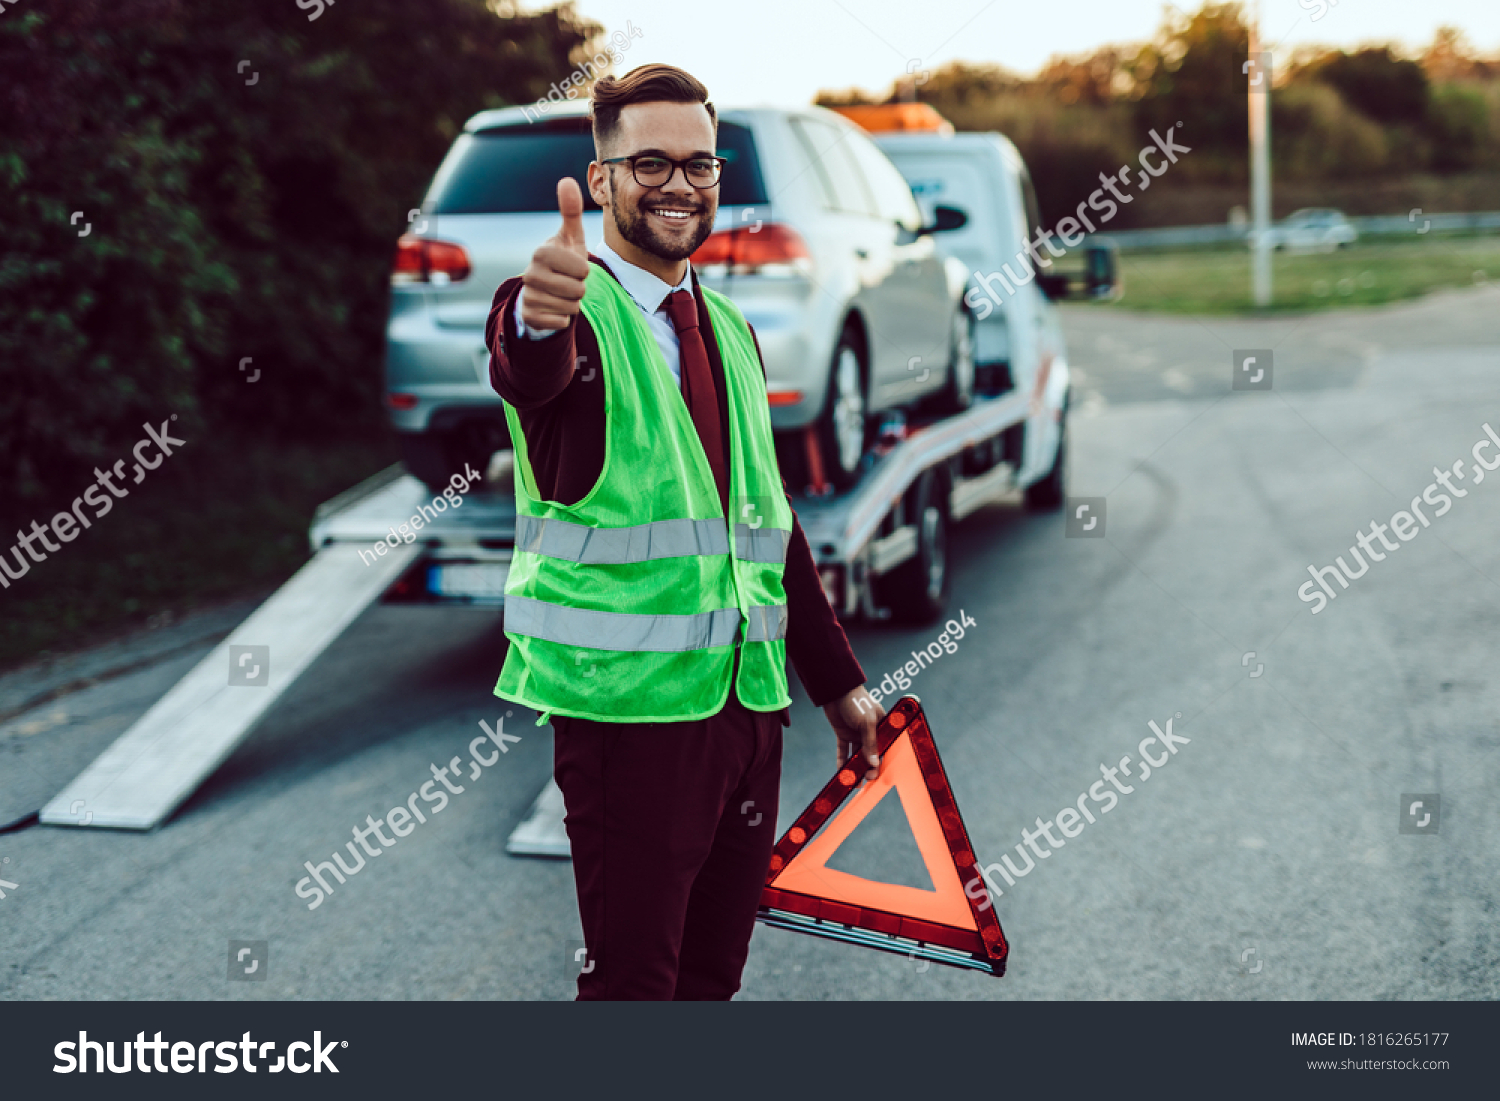 Elegant middle age business man is happy and satisfied with fast towing service for help on the road. He showing thumb up. Roadside assistance concept. #1816265177